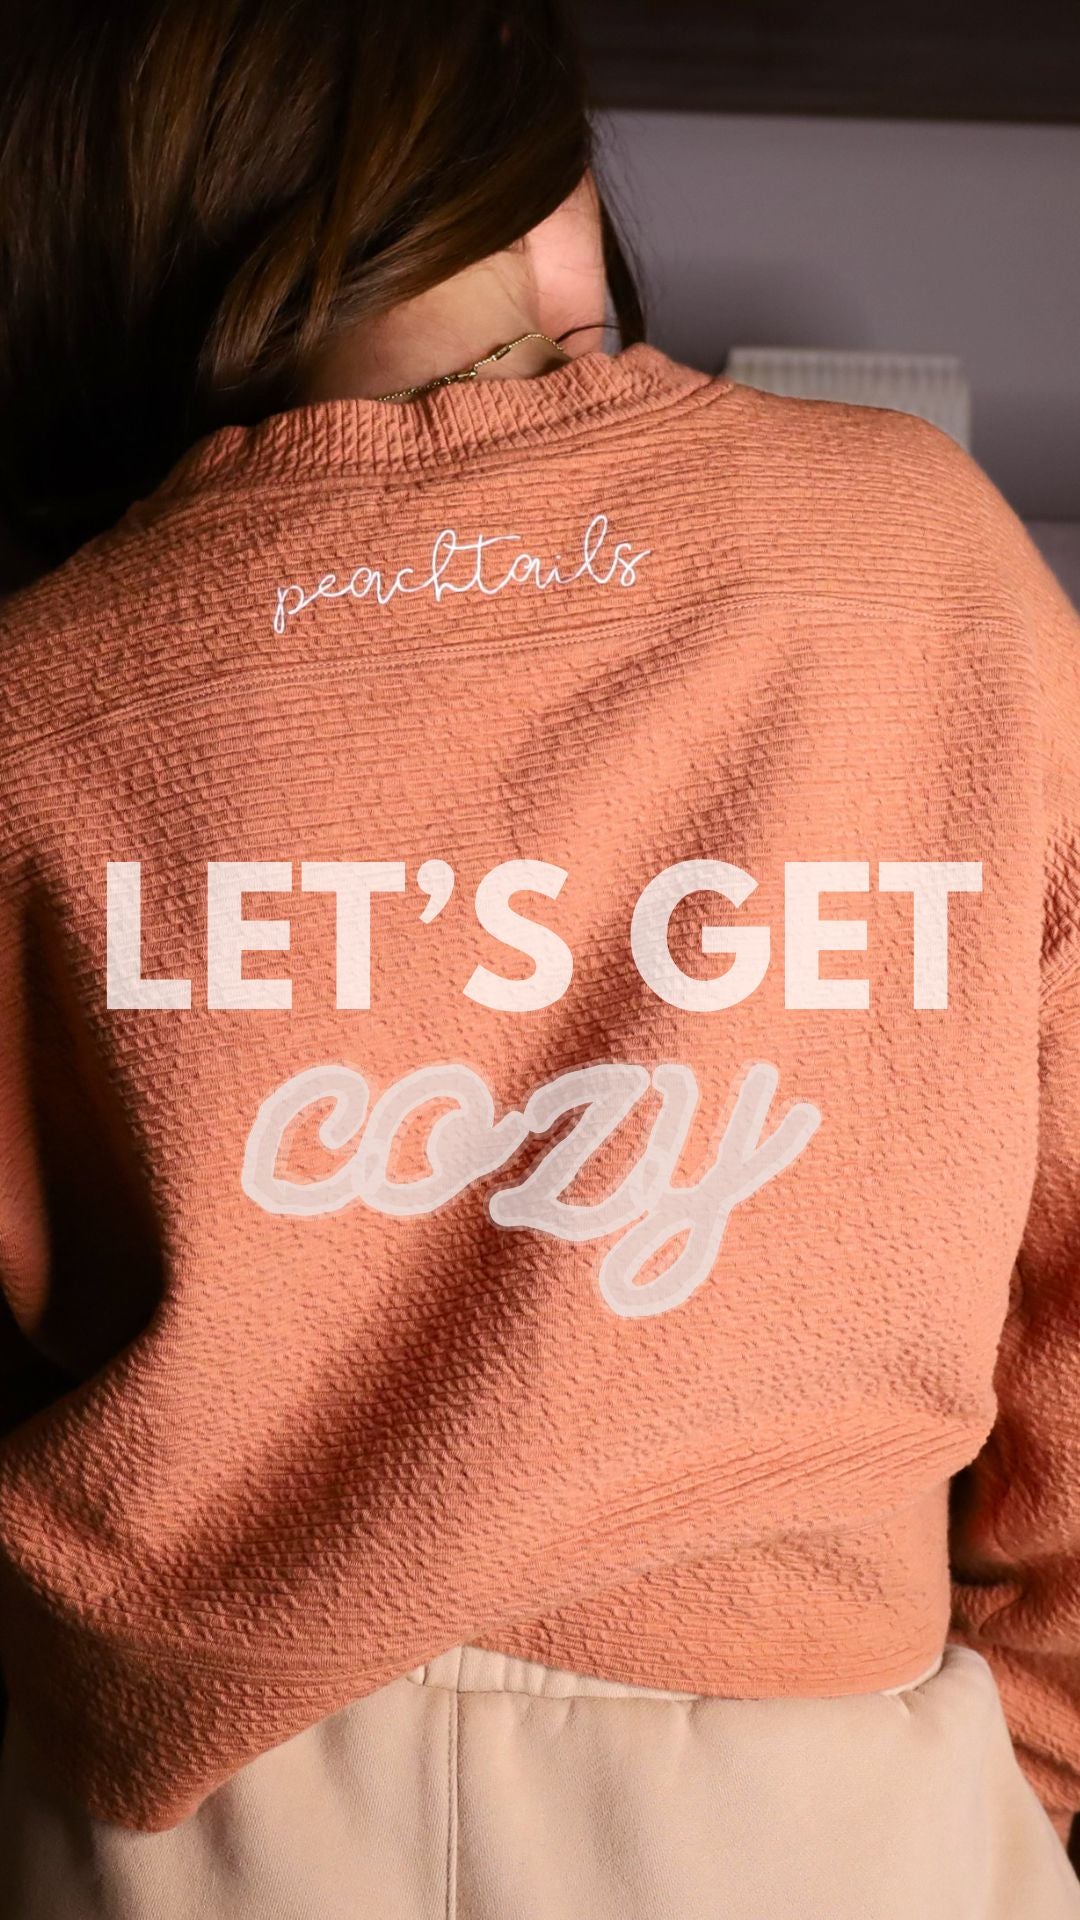 The image captures the back of a woman wearing a cozy, pink sweater with the words "LET'S GET cozy" in large, white cursive text overlaying the photo. The sweater's texture is visible, suggesting softness and warmth. In the top left corner, the word "peachtails" is scripted in a smaller, delicate font. The lighting and composition of the photo convey a comfortable and snug atmosphere, inviting the viewer to embrace the concept of getting cozy.